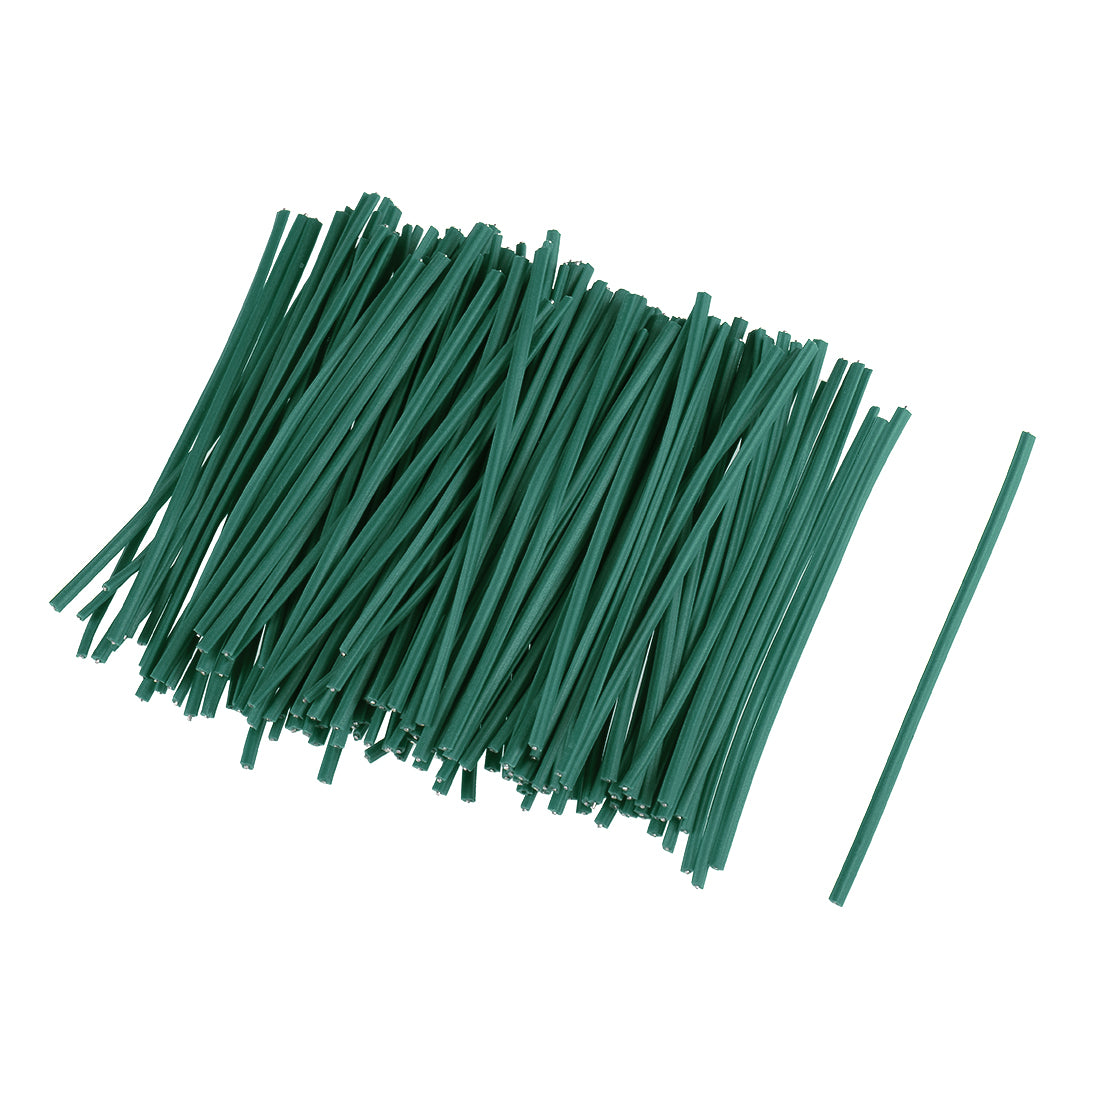 uxcell Uxcell 3 Inches Plastic Twist Ties Reusable Cable Cord Wire Ties Green 500pcs